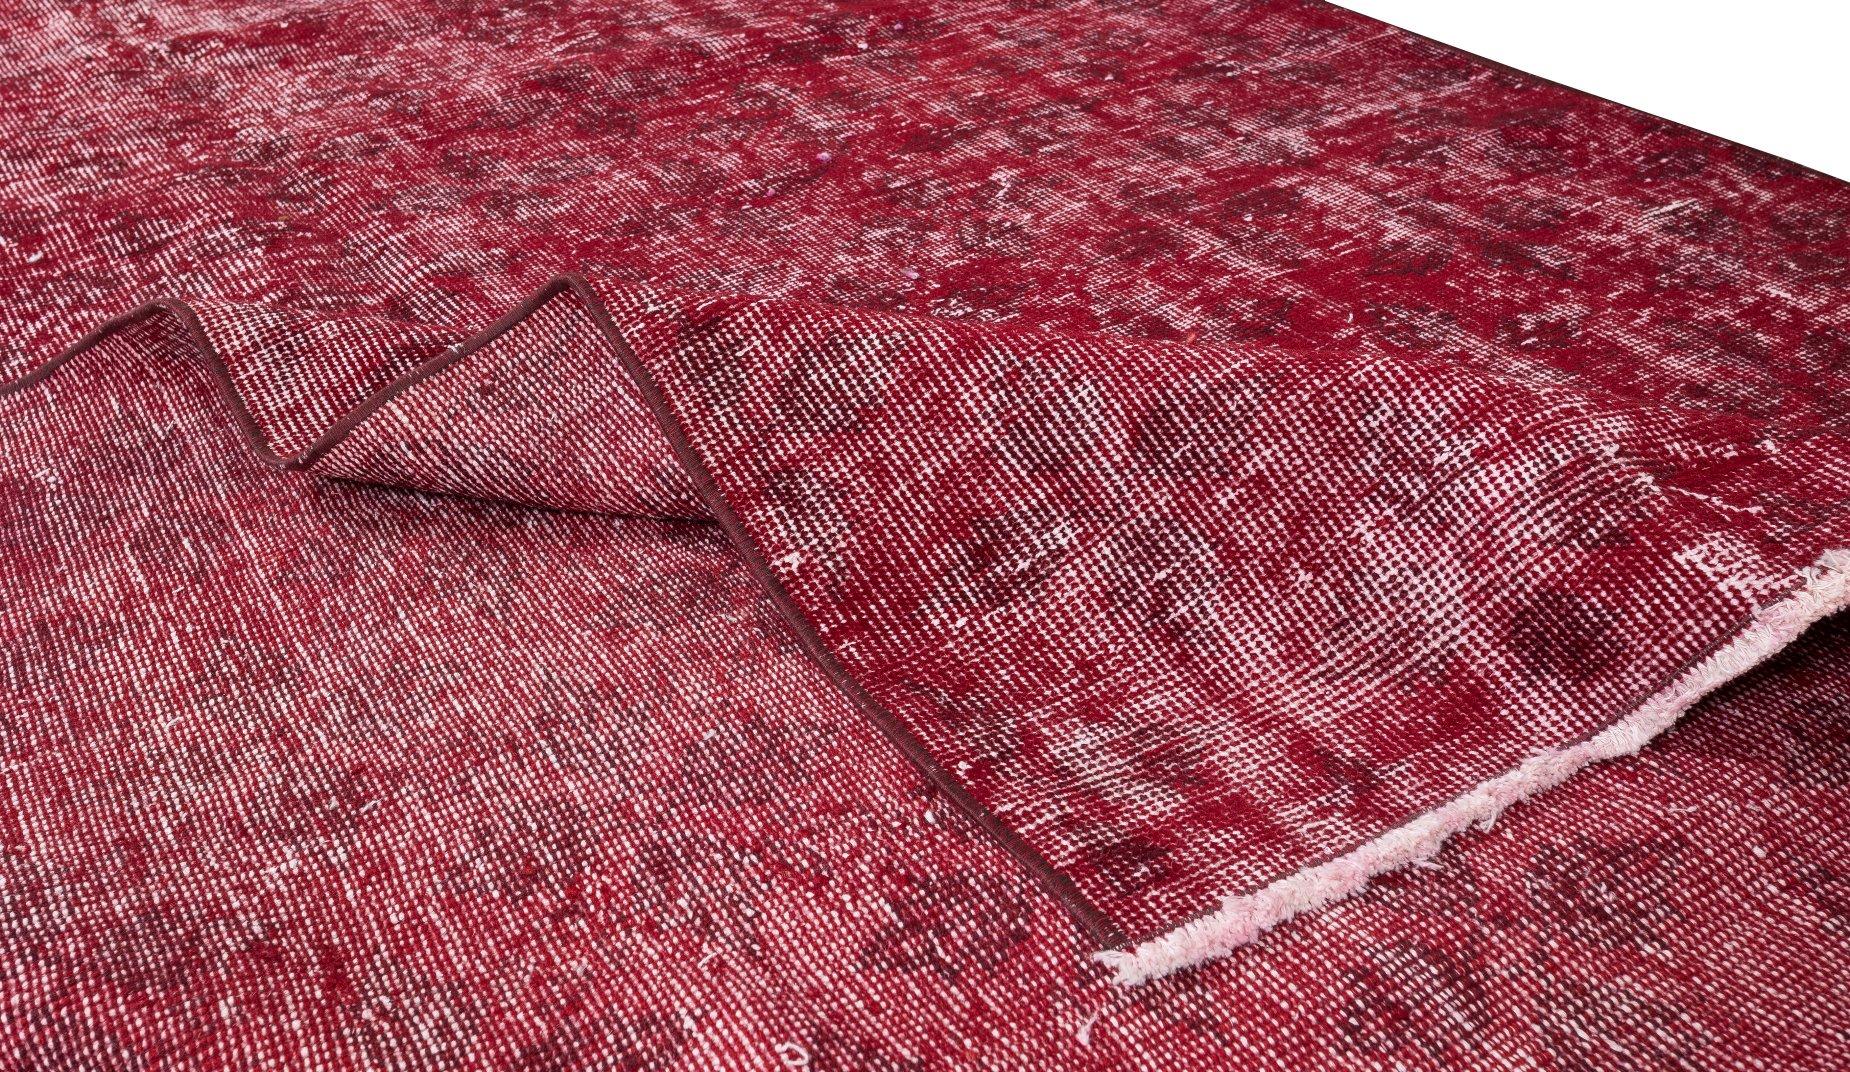 Hand-Knotted Turkish Rug in Burgundy Red, Great 4 Modern Interiors. Vintage Carpet For Sale